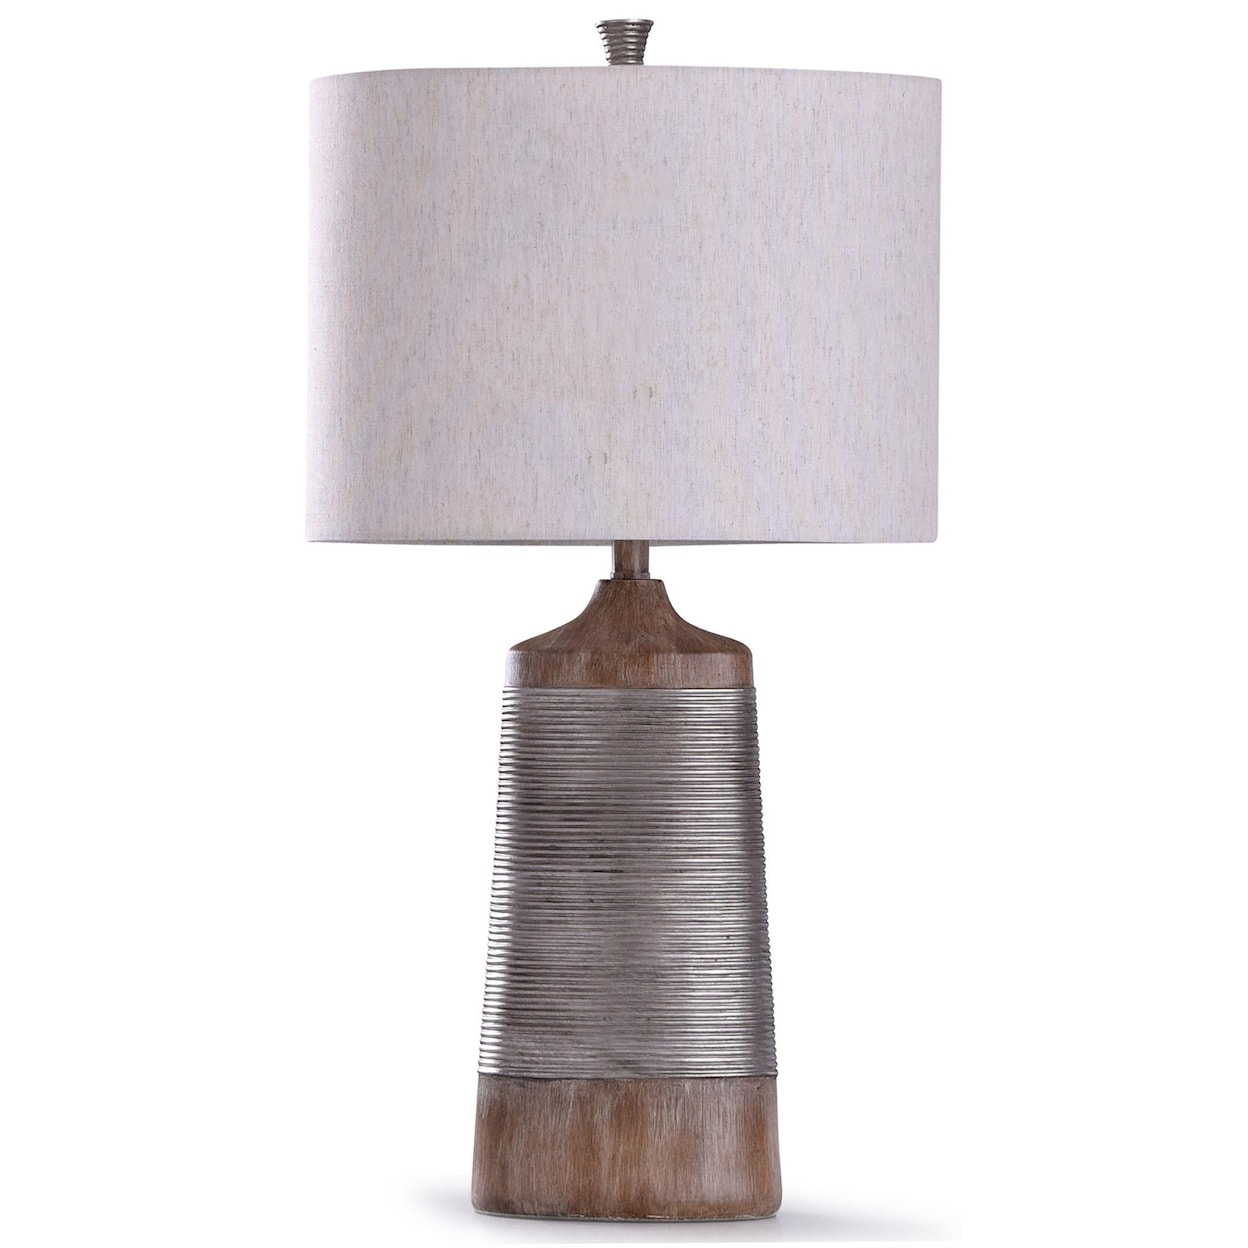 StyleCraft Lamps Haverhill 31 Inch Table Lamp